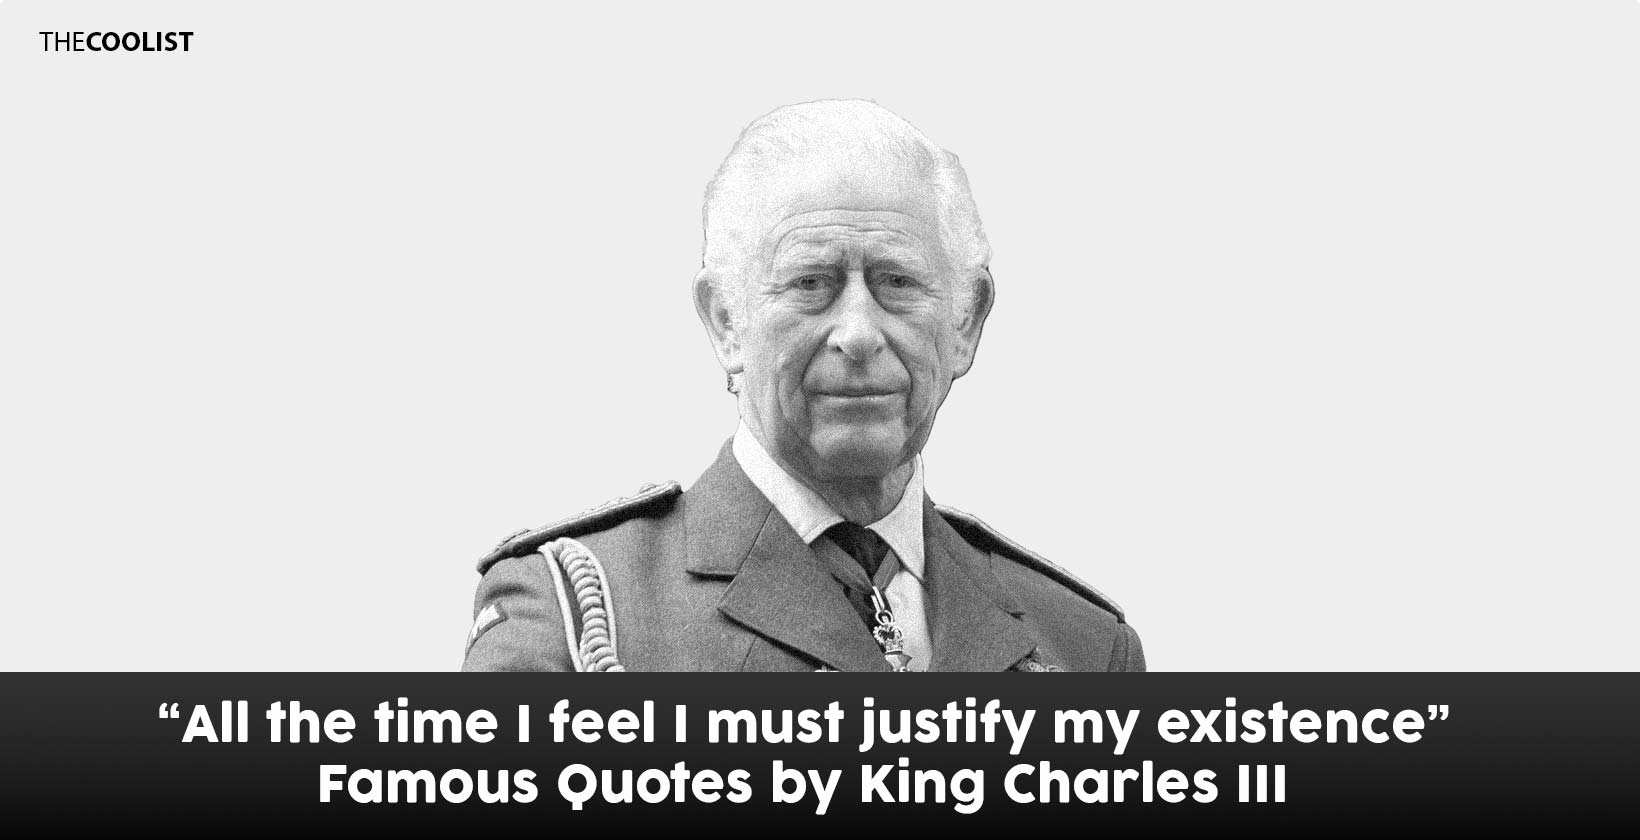 50 Famous Quotes by King Charles: Heartfelt Words from the New Monarch